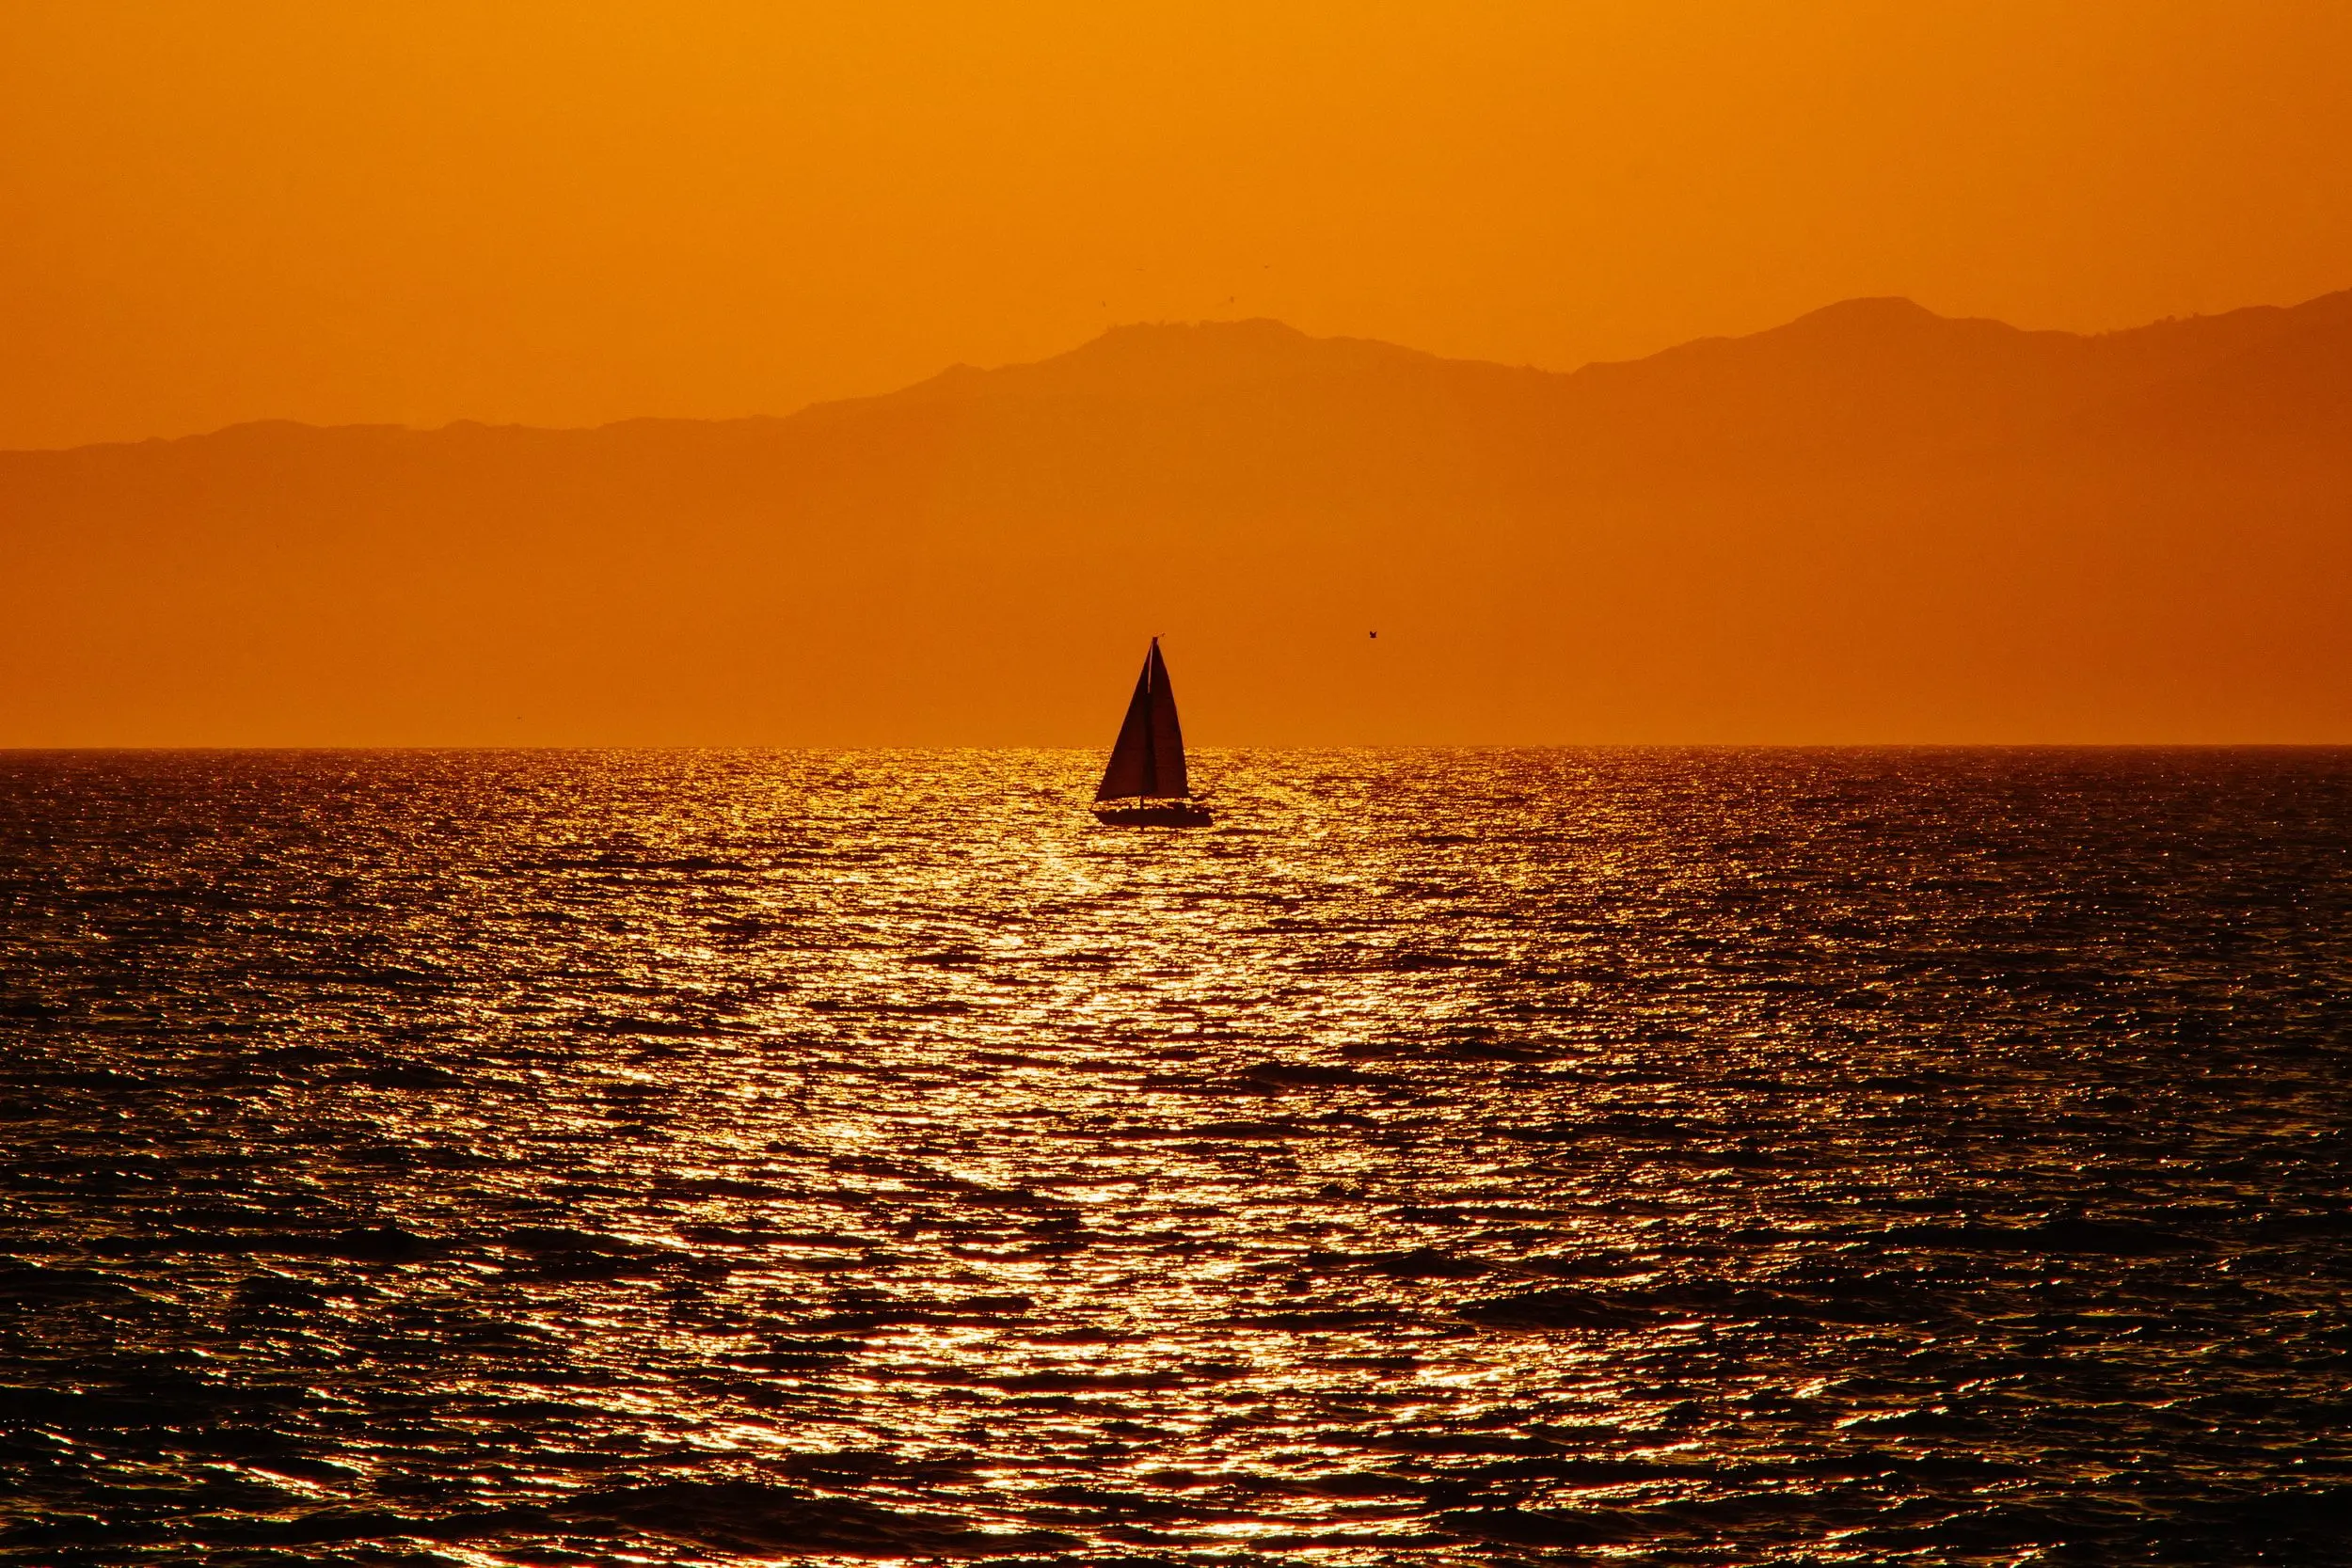 A sailboat near the horizon on the black ocean water, silhouetted against mountains. Golden hour.